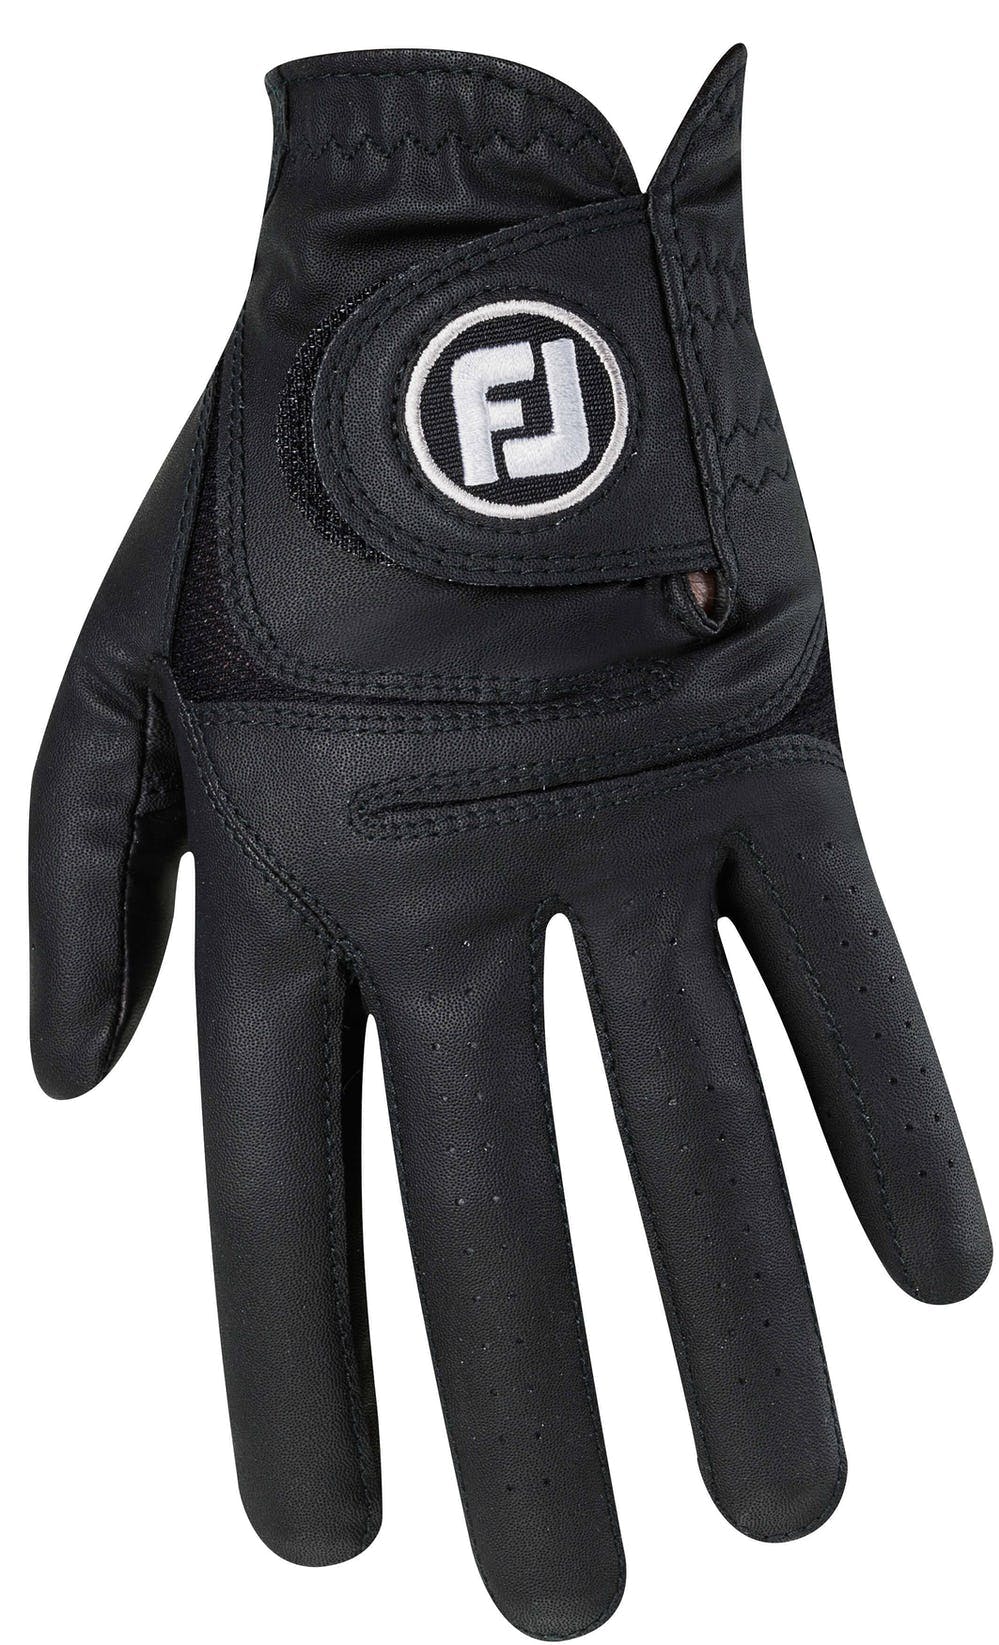 Product image of the FootJoy WeatherSof in Black.